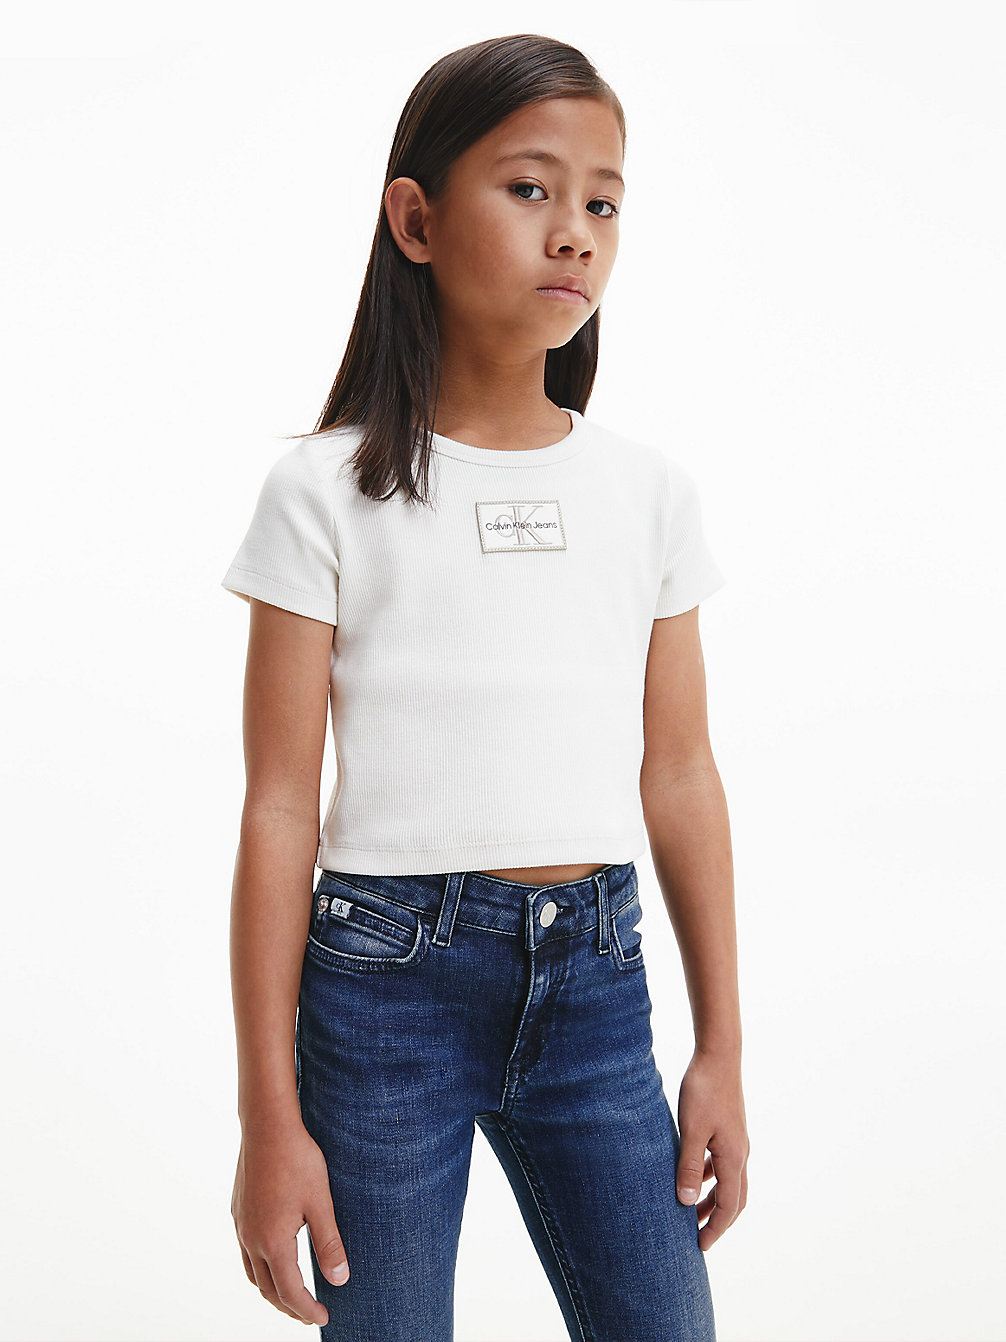 IVORY Ribbed Top undefined girls Calvin Klein